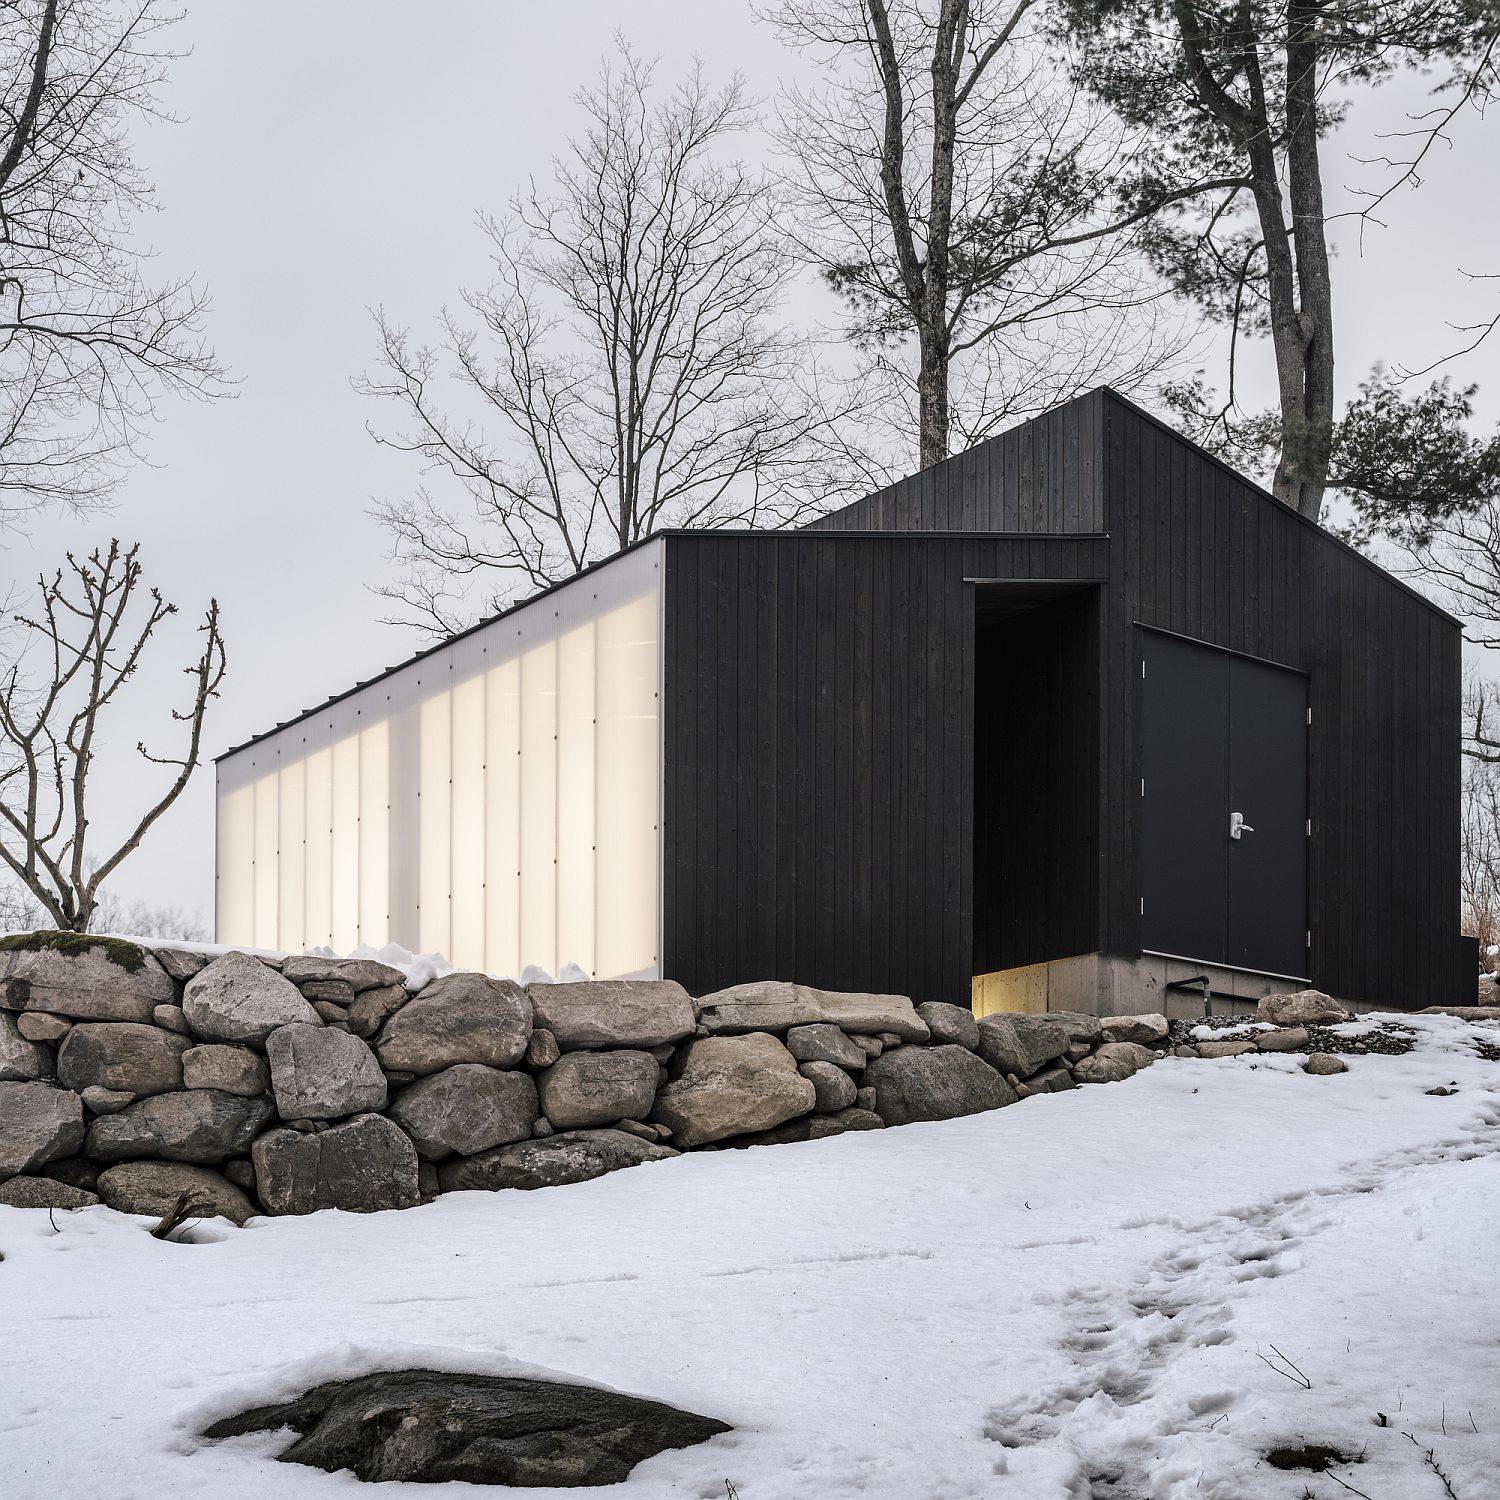 Cozy-and-adaptable-small-wooden-cabin-in-New-York-with-polycarbonate-wall-on-one-side-81538